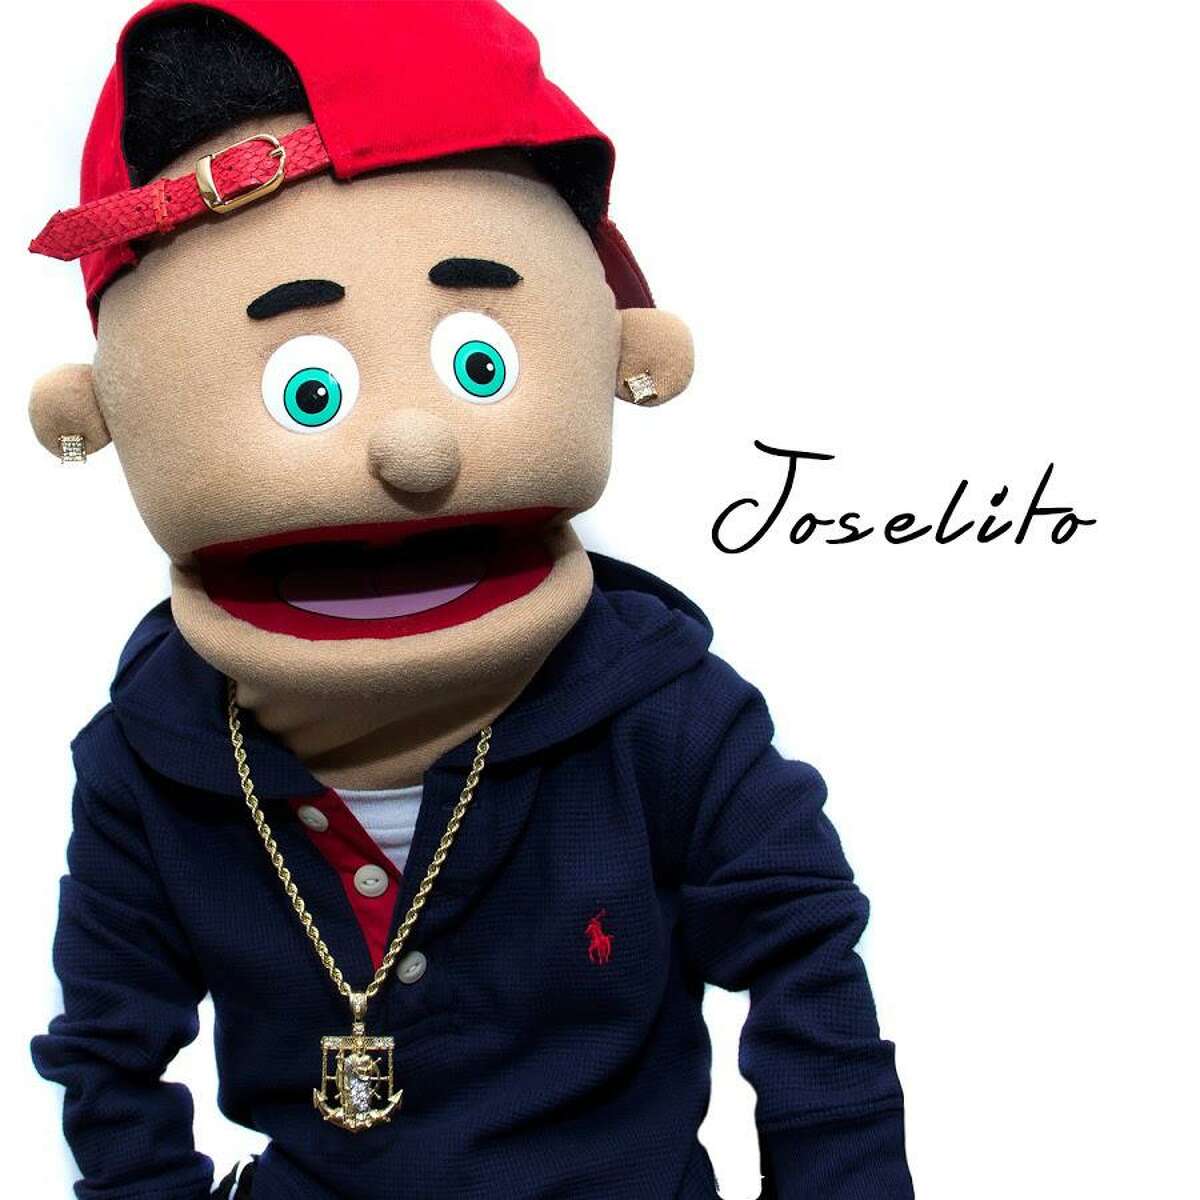 Joselito Dapuppet to appear at Fairfield Comedy Club